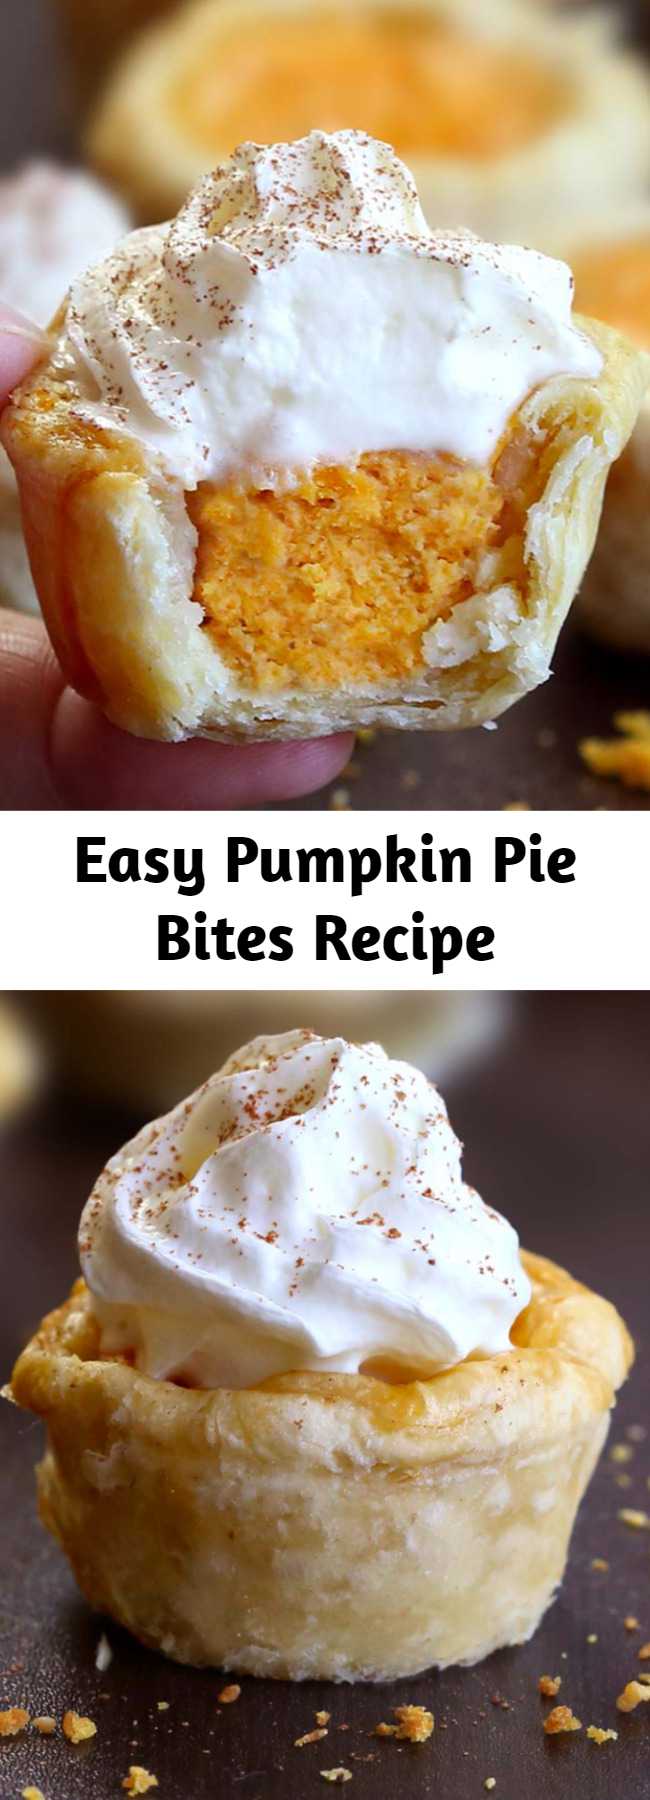 Easy Pumpkin Pie Bites Recipe - All the flavors of Homemade Pumpkin Pie packed into perfect portable fall dessert